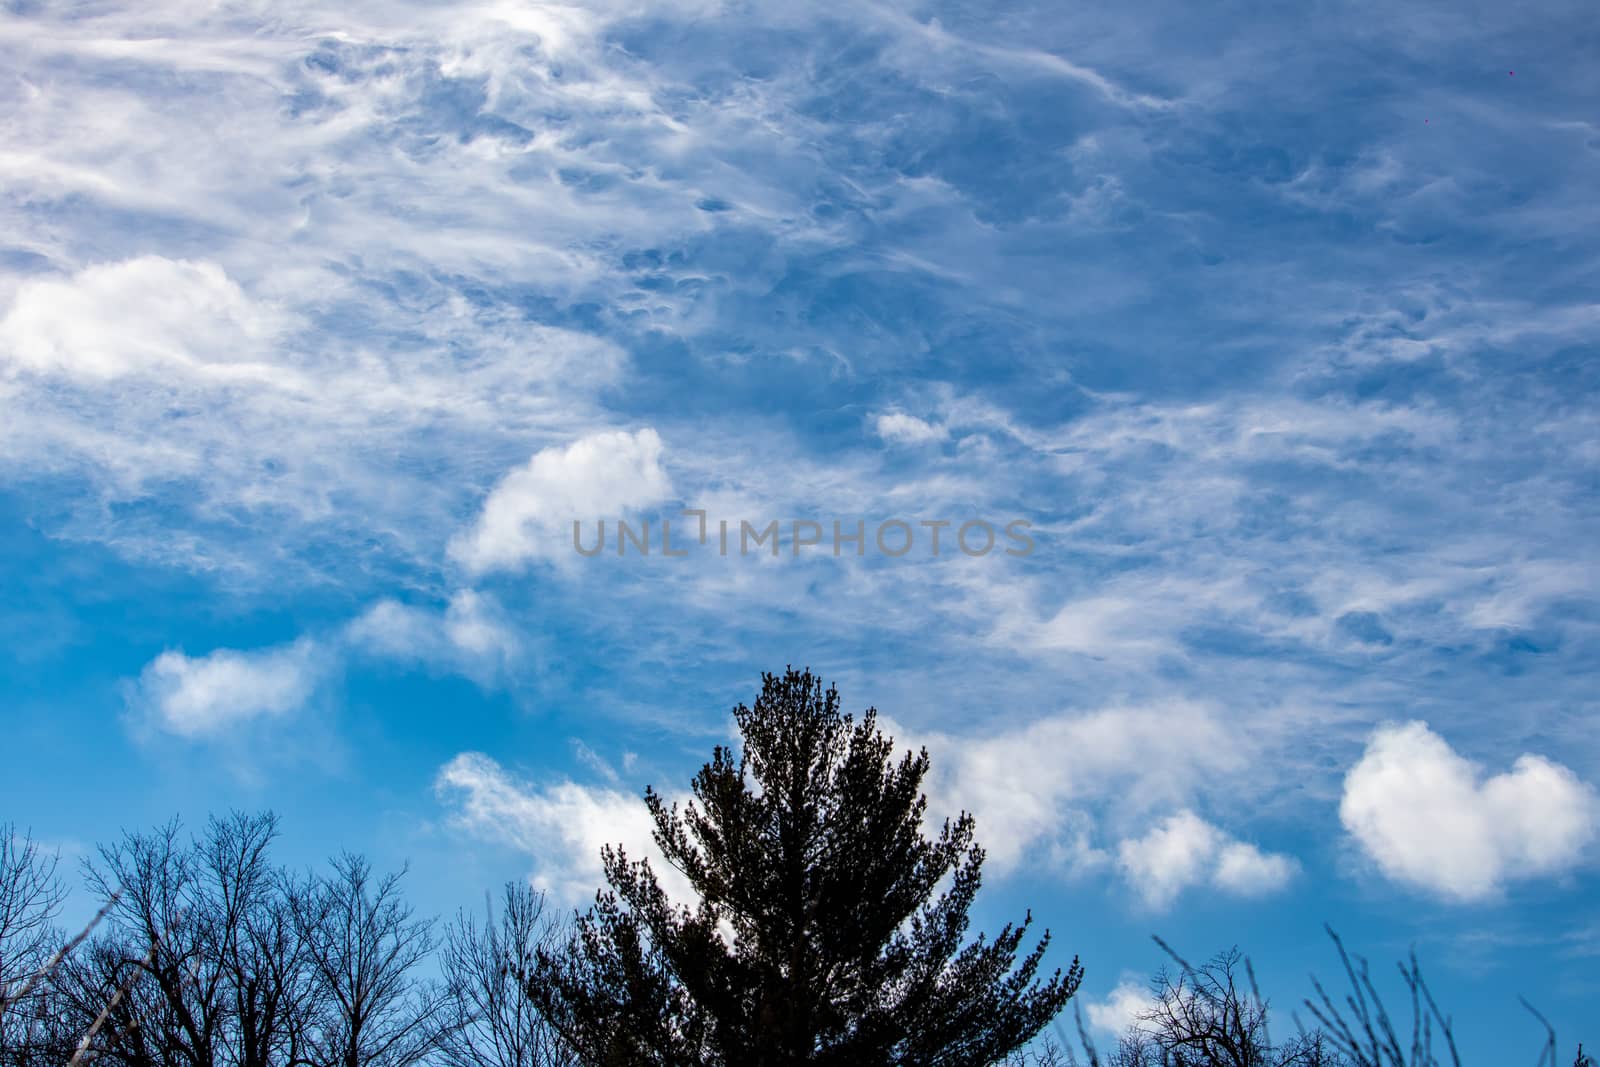 Tree Silhouettes Against Textured Cirrus Clouds by colintemple